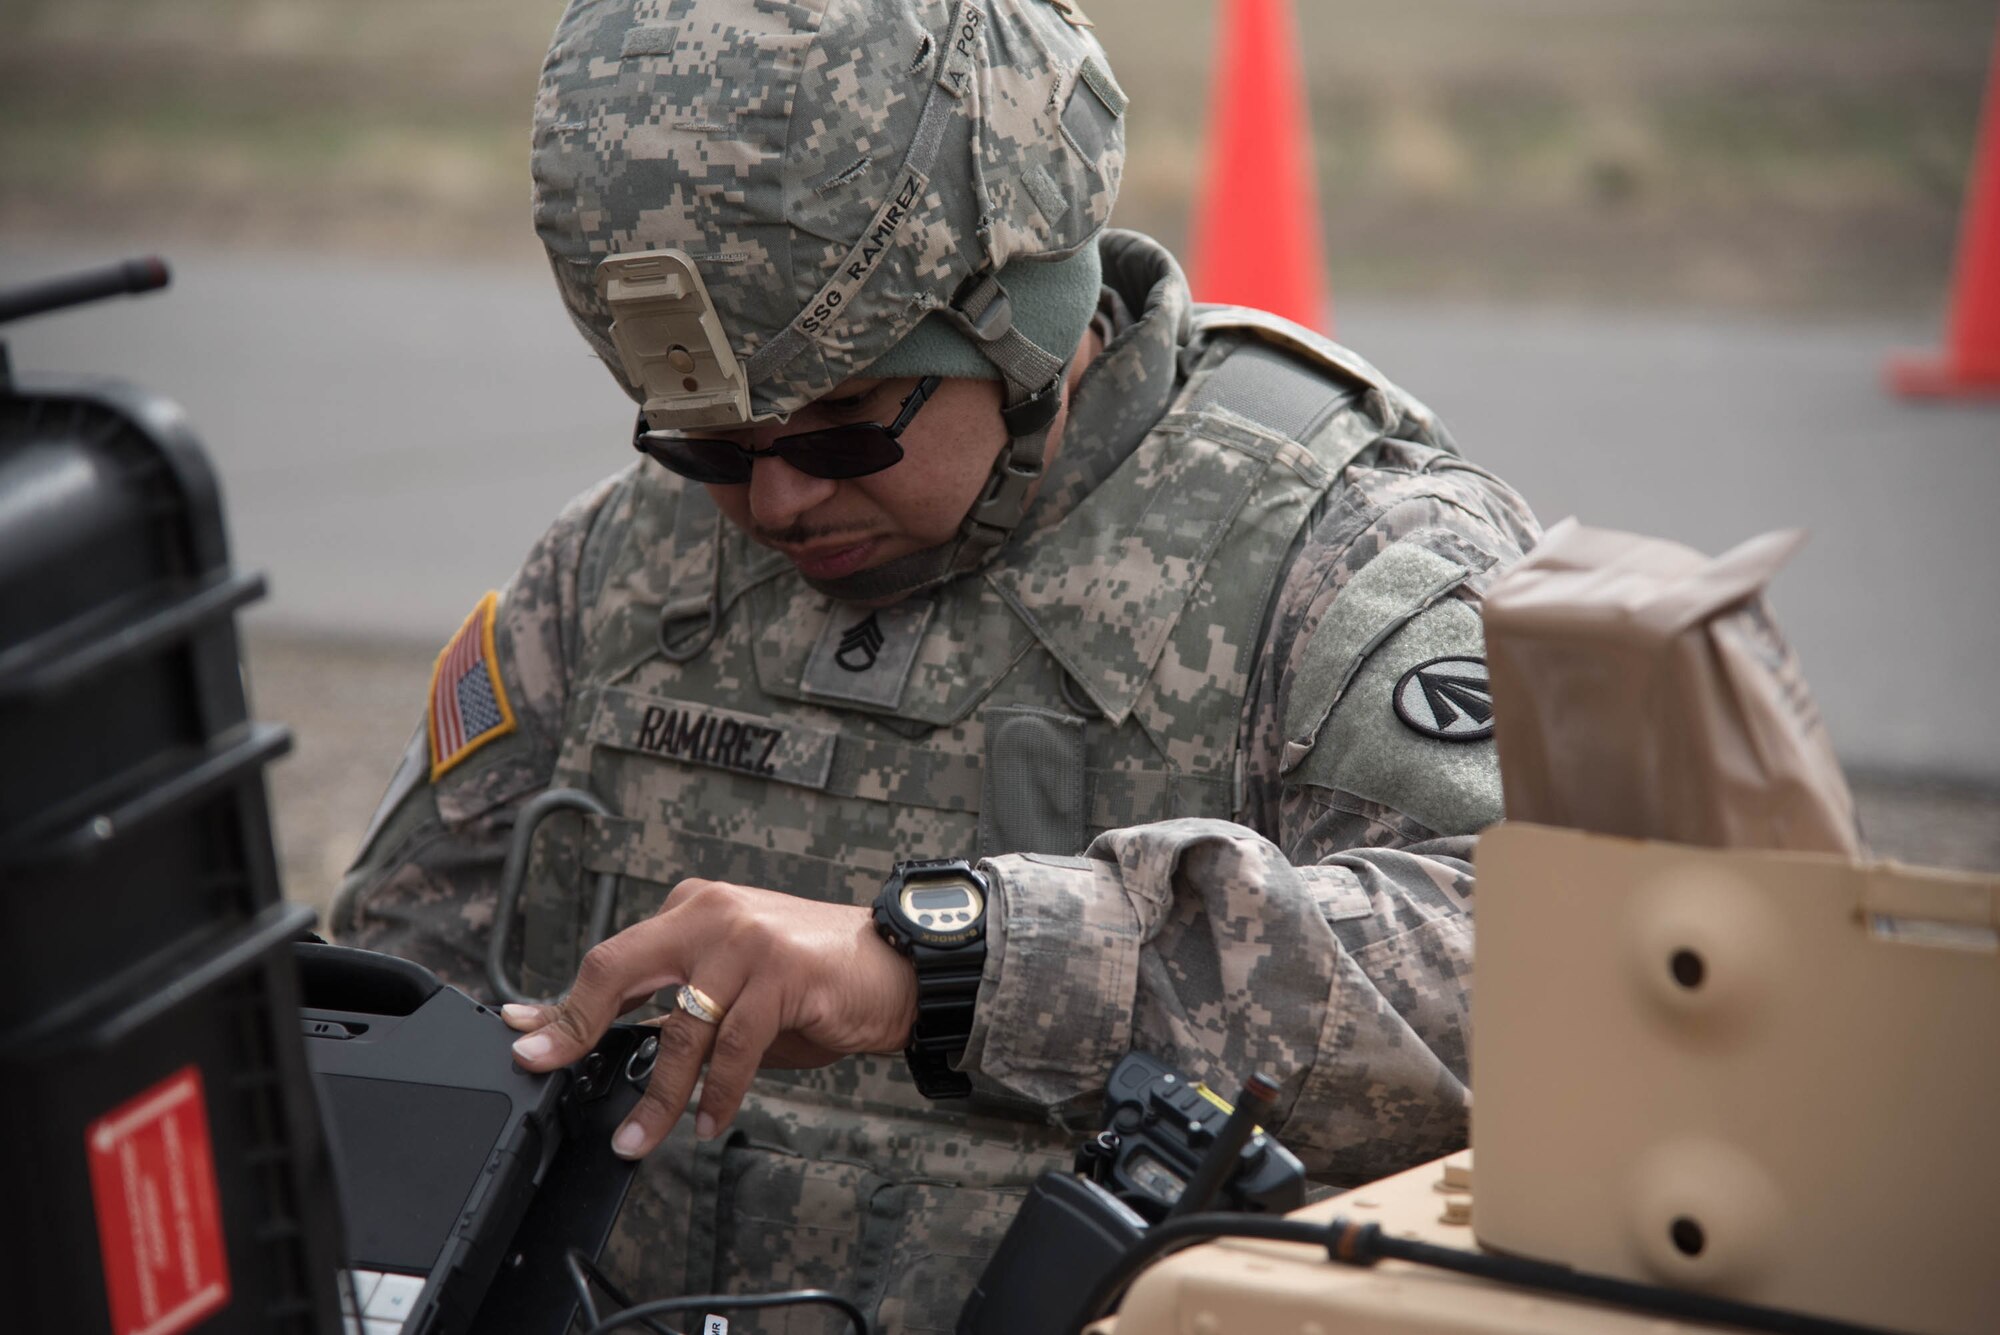 U.S. Army Staff Sgt. Eric Ramirez, in-transit visibility NCOIC for the 688th Rapid Port Opening Element, inspects his equipment at Amedee Army Airfield, Calif., March 8, 2016. The U.S. Army’s 688th RPOE is working in conjunction with the Kentucky Air National Guard’s 123rd Contingency Response Group and a team from the Defense Logistics Agency to operate Joint Task Force-Port Opening Sangala during a week-long exercise called Operation Lumberjack. The objective of the JTF-PO is to establish an aerial port of debarkation, provide initial distribution capability and set up warehousing for distribution beyond a forward node. (Kentucky Air National Guard photo by 1st Lt. James Killen)